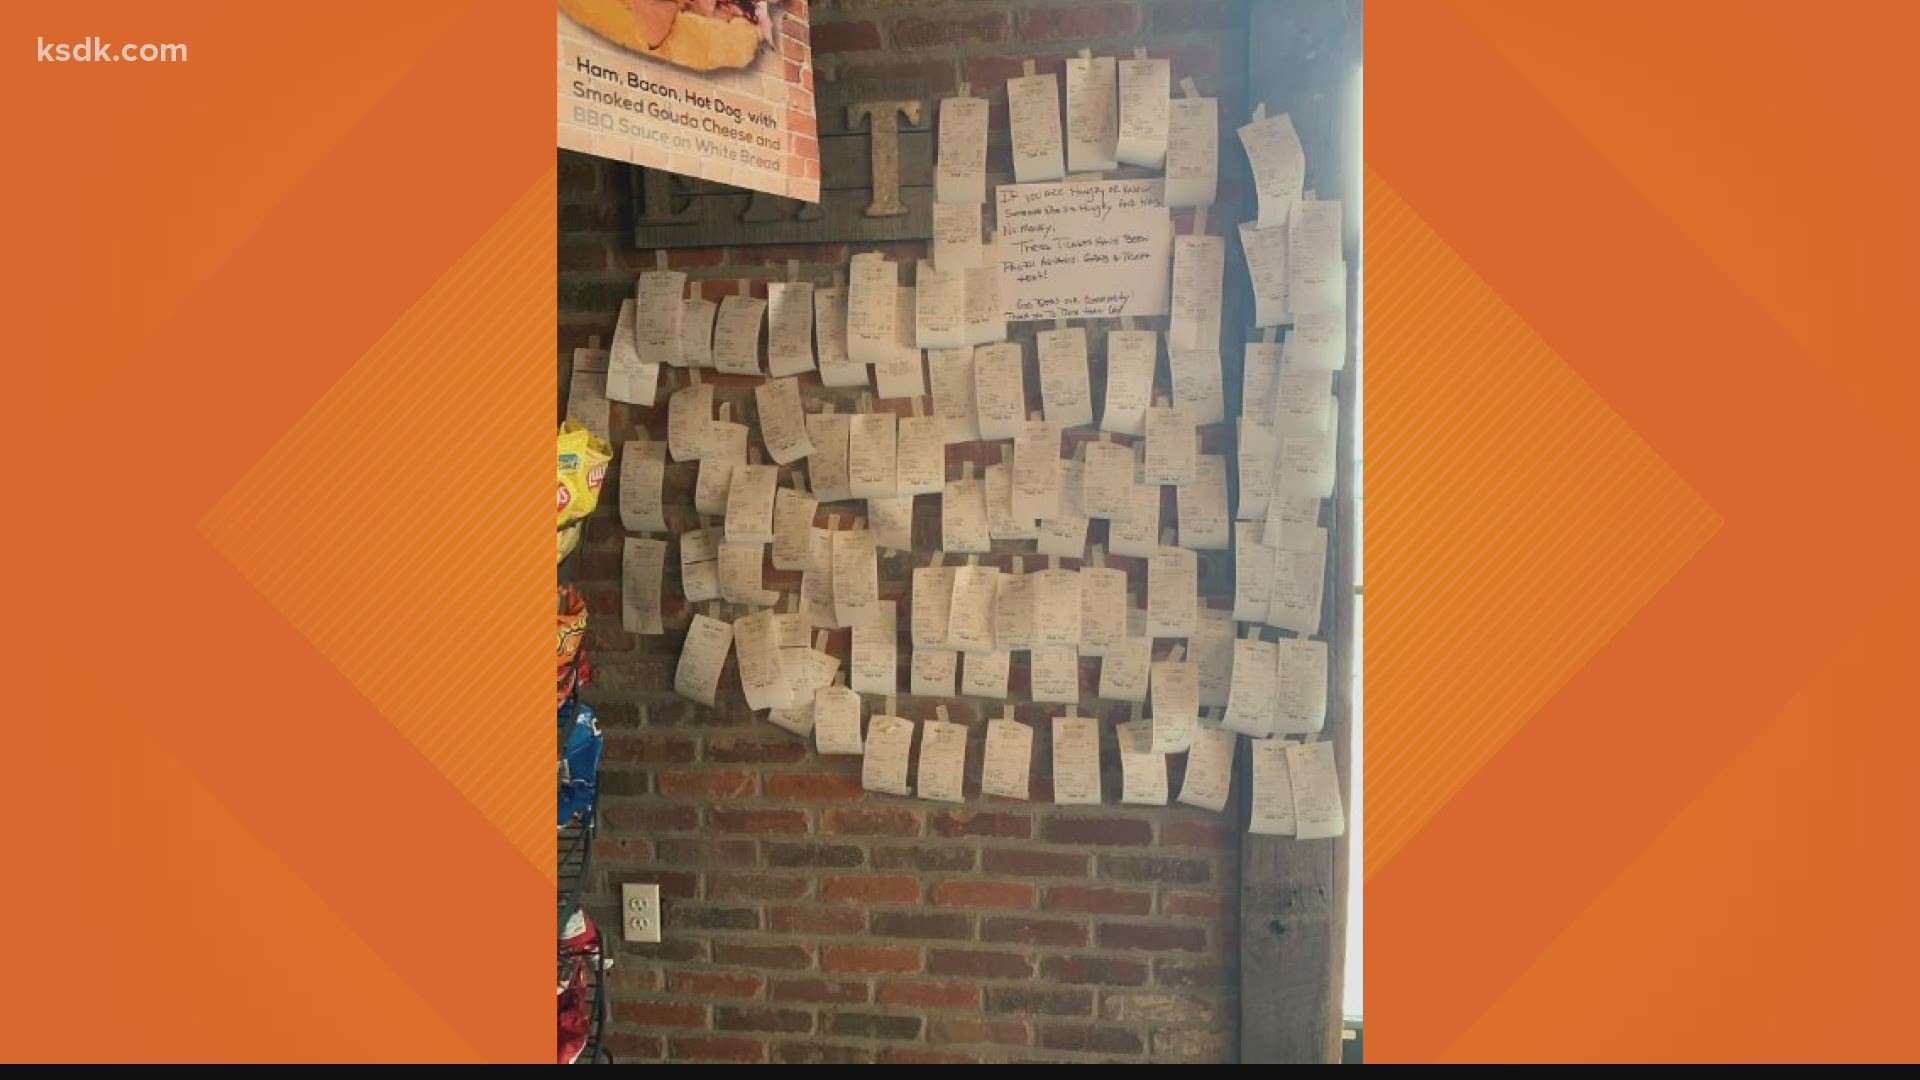 Instead of art on the wall at Ruma’s Deli in St. Charles, there are about 100 receipts. But those meals have not been eaten yet. They’re for people in need of a meal